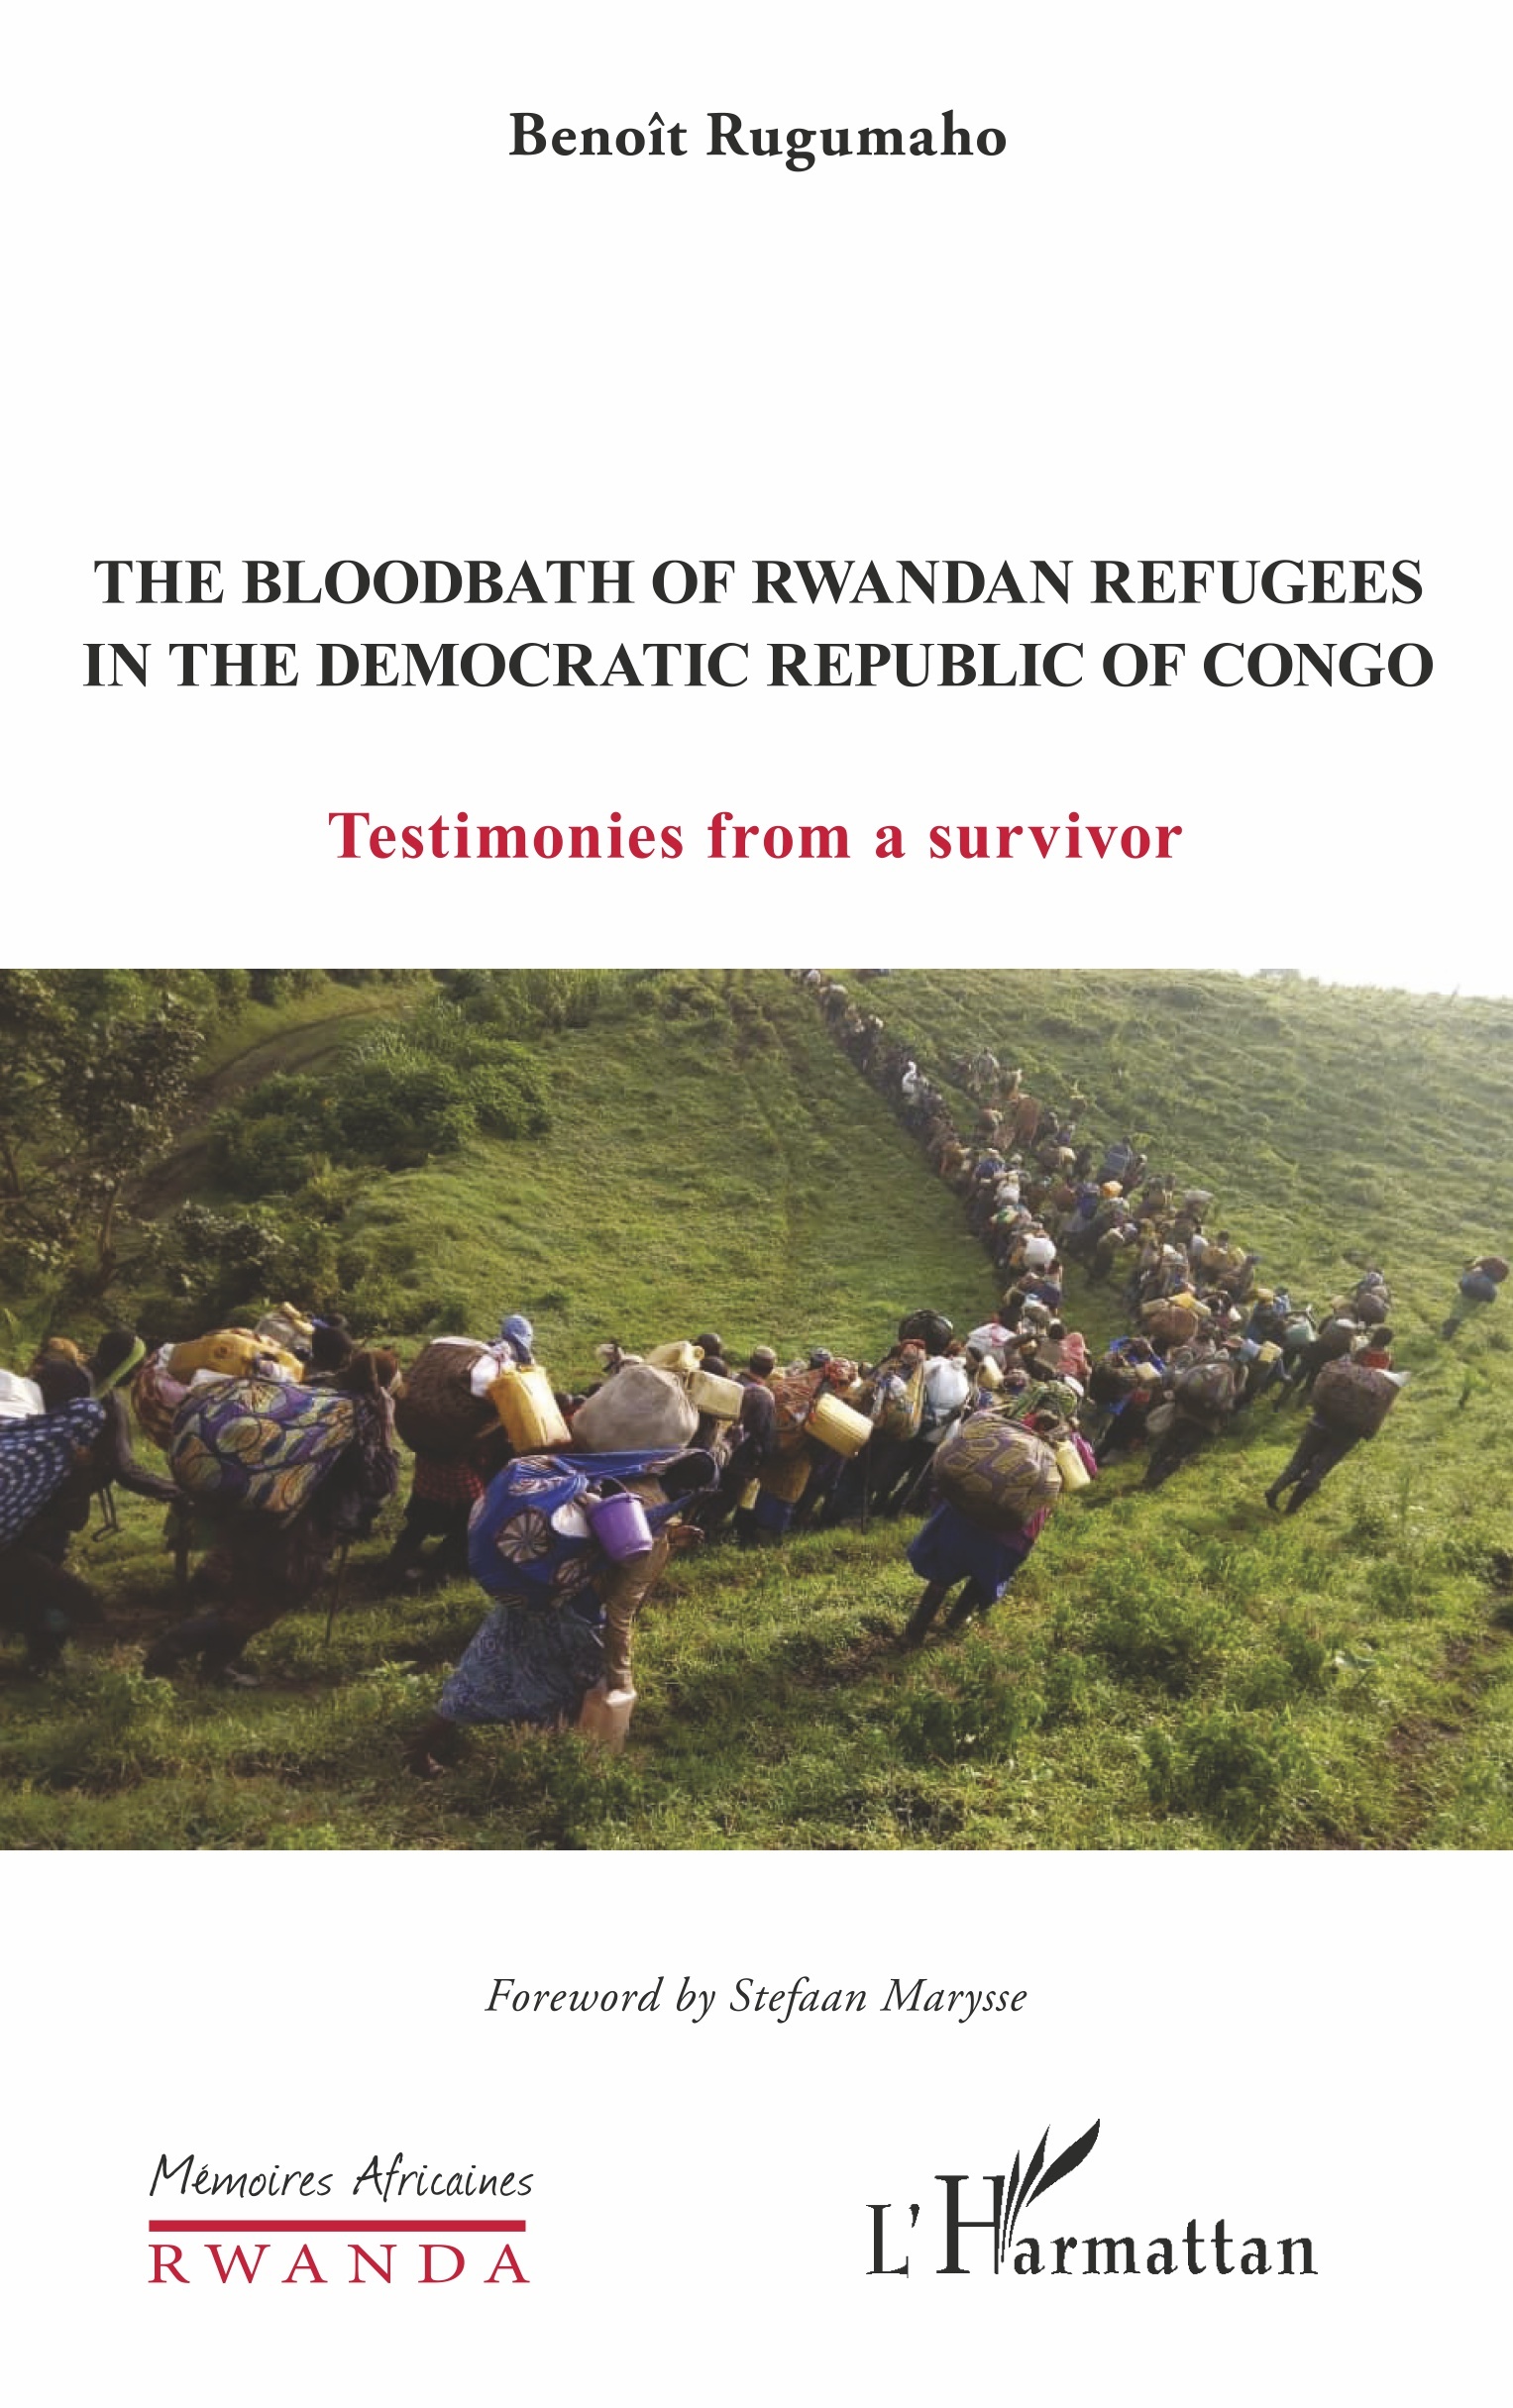 The Bloodbath of Rwandan Refugees in the Democratic Republic of Congo, Testimonies from a survivor (9782343191652-front-cover)